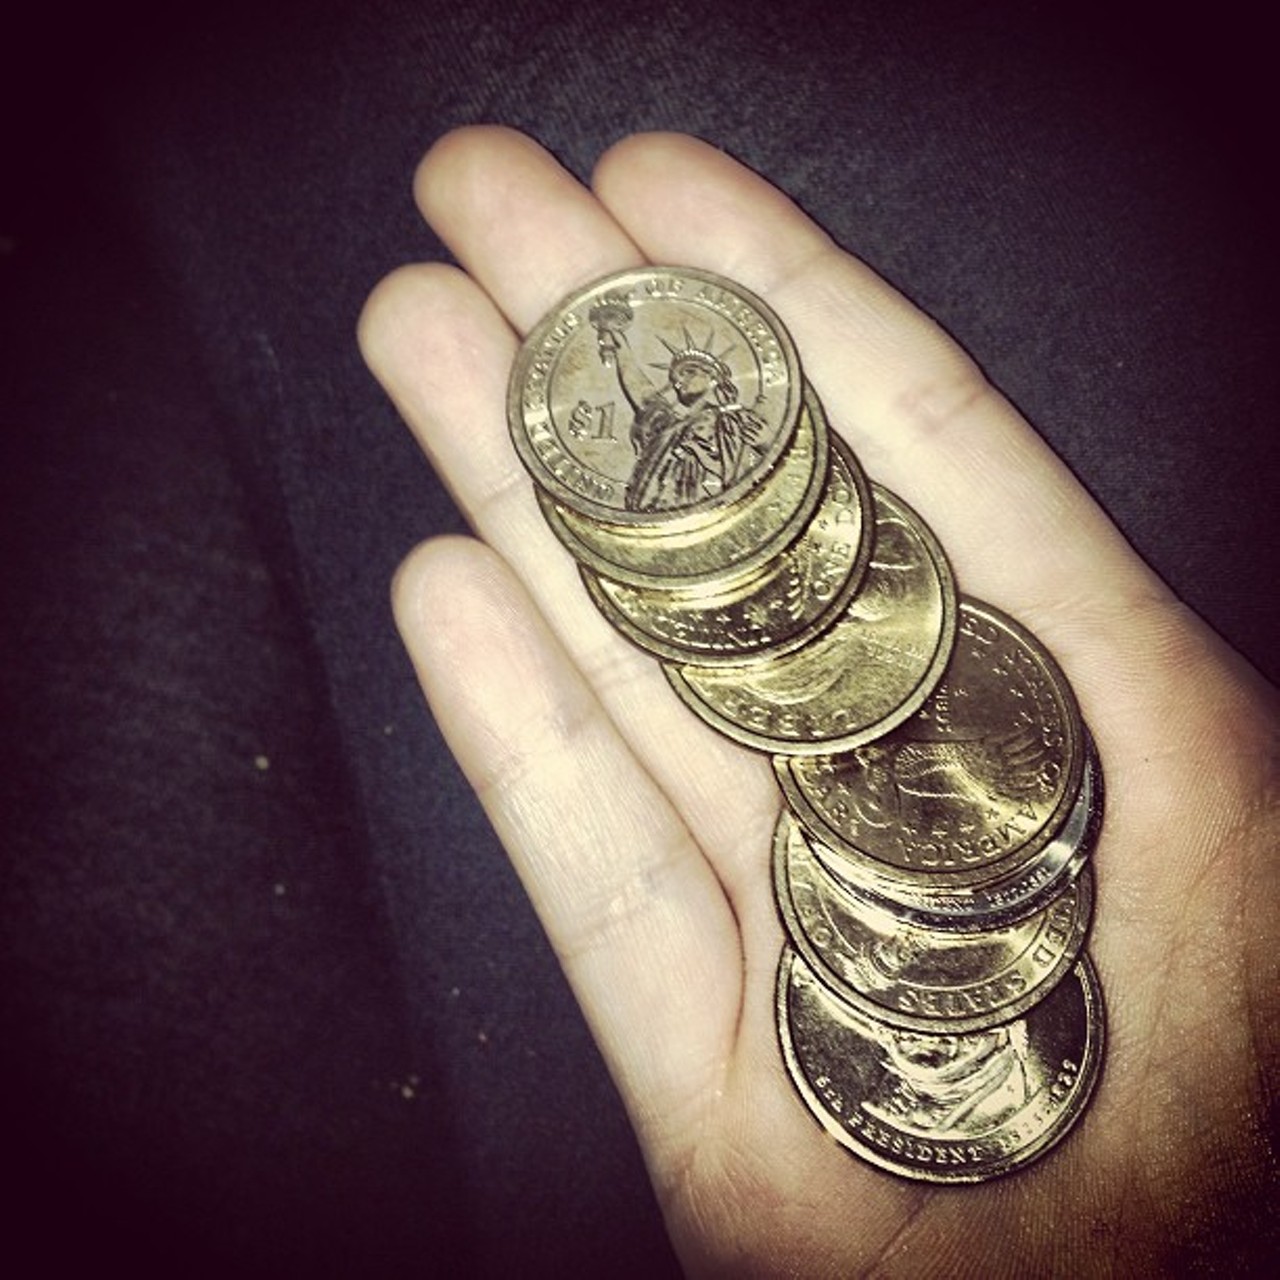 Did I really just get my change in all dollar coins ? #Clevelandprobz